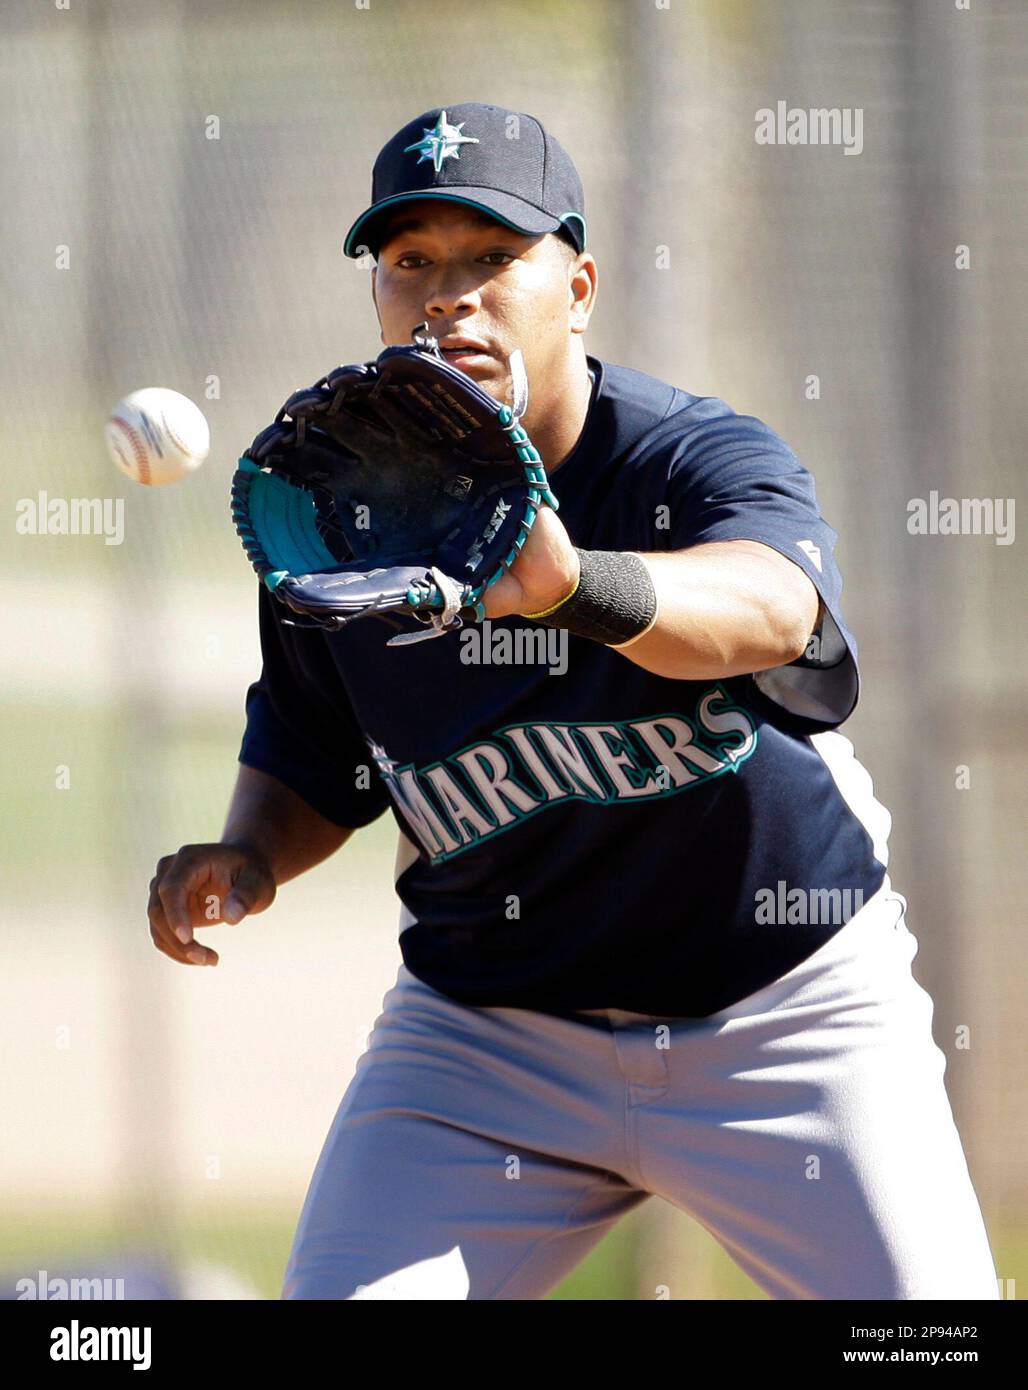 Seattle Mariners infielder Jose Lopez catches a ball during